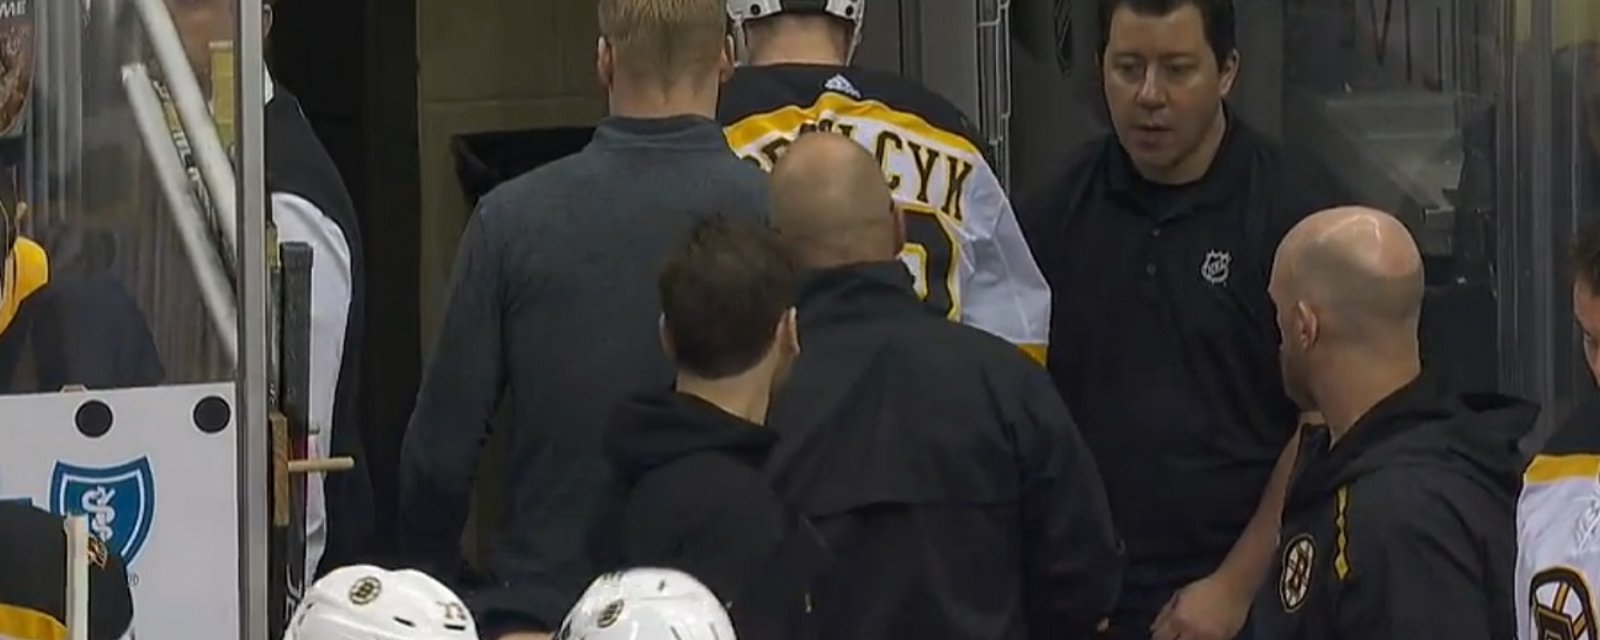 Matt Grzelcyk helped off the ice and it does not look good.